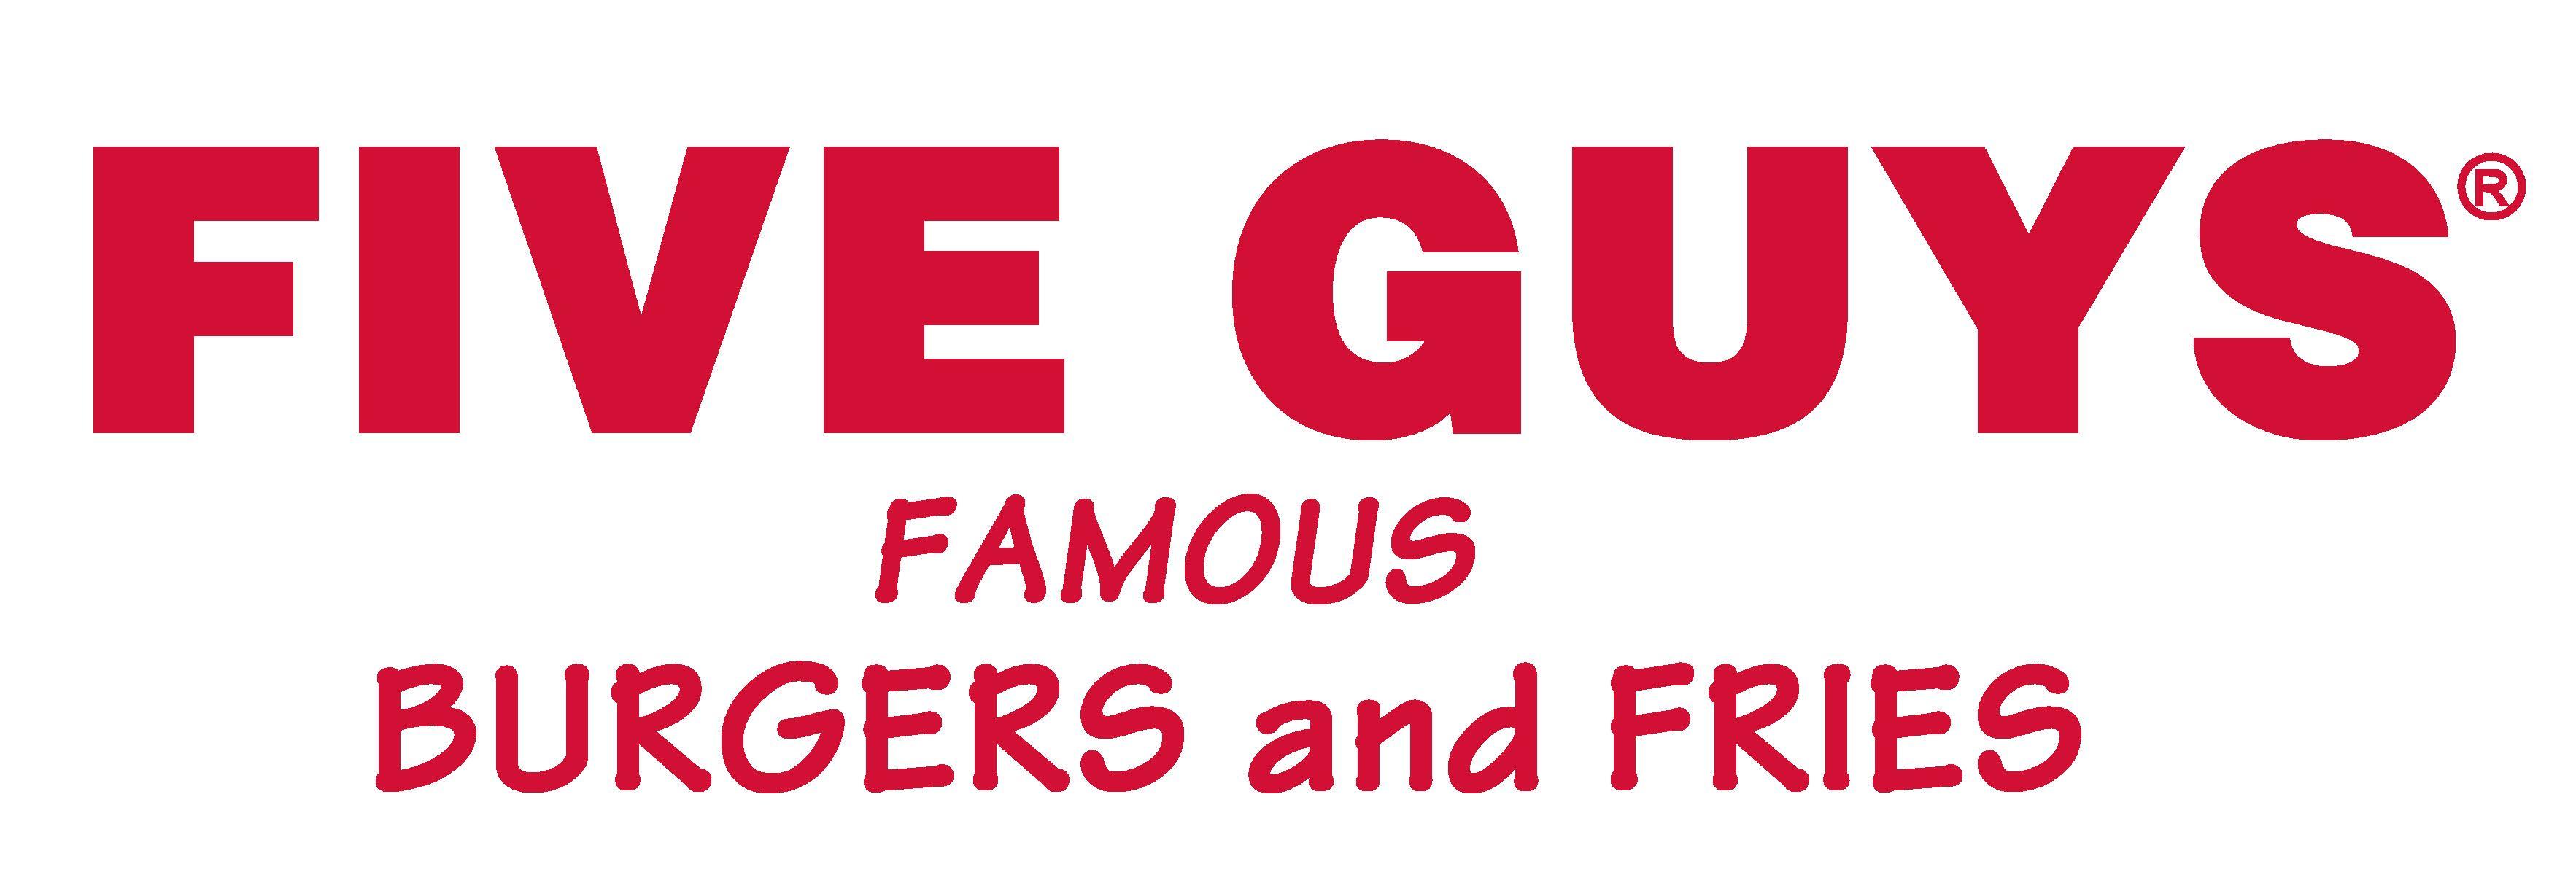 Famous Burgers and Fries Logo - Five Guys Burgers and Fries Opening a Downtown Location | THE FOOD ...